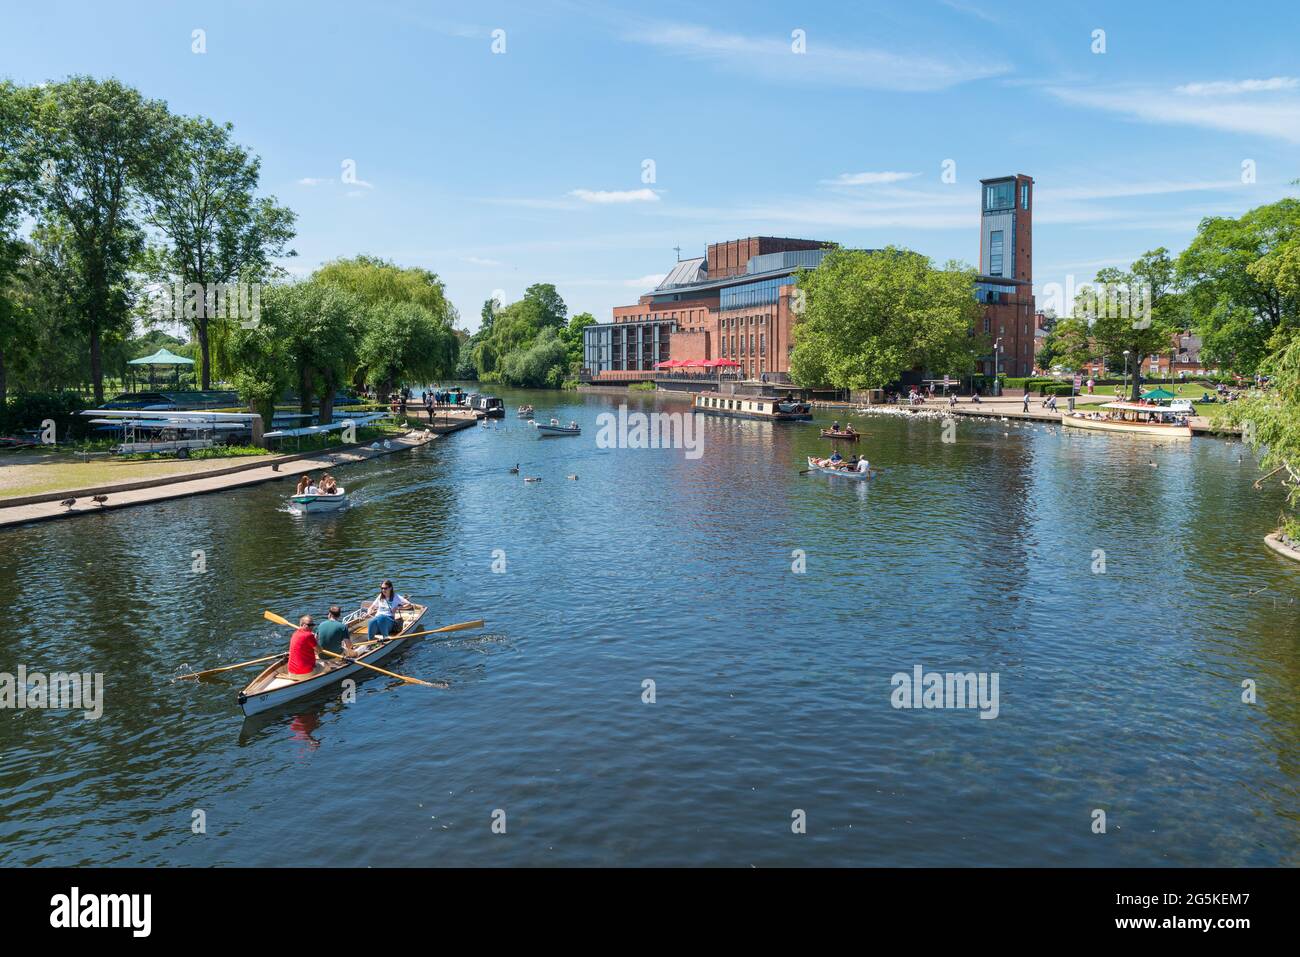 The Royal Shakespeare Theatre beside the River Avon in Stratford-upon-Avon, Warwickshire Stock Photo